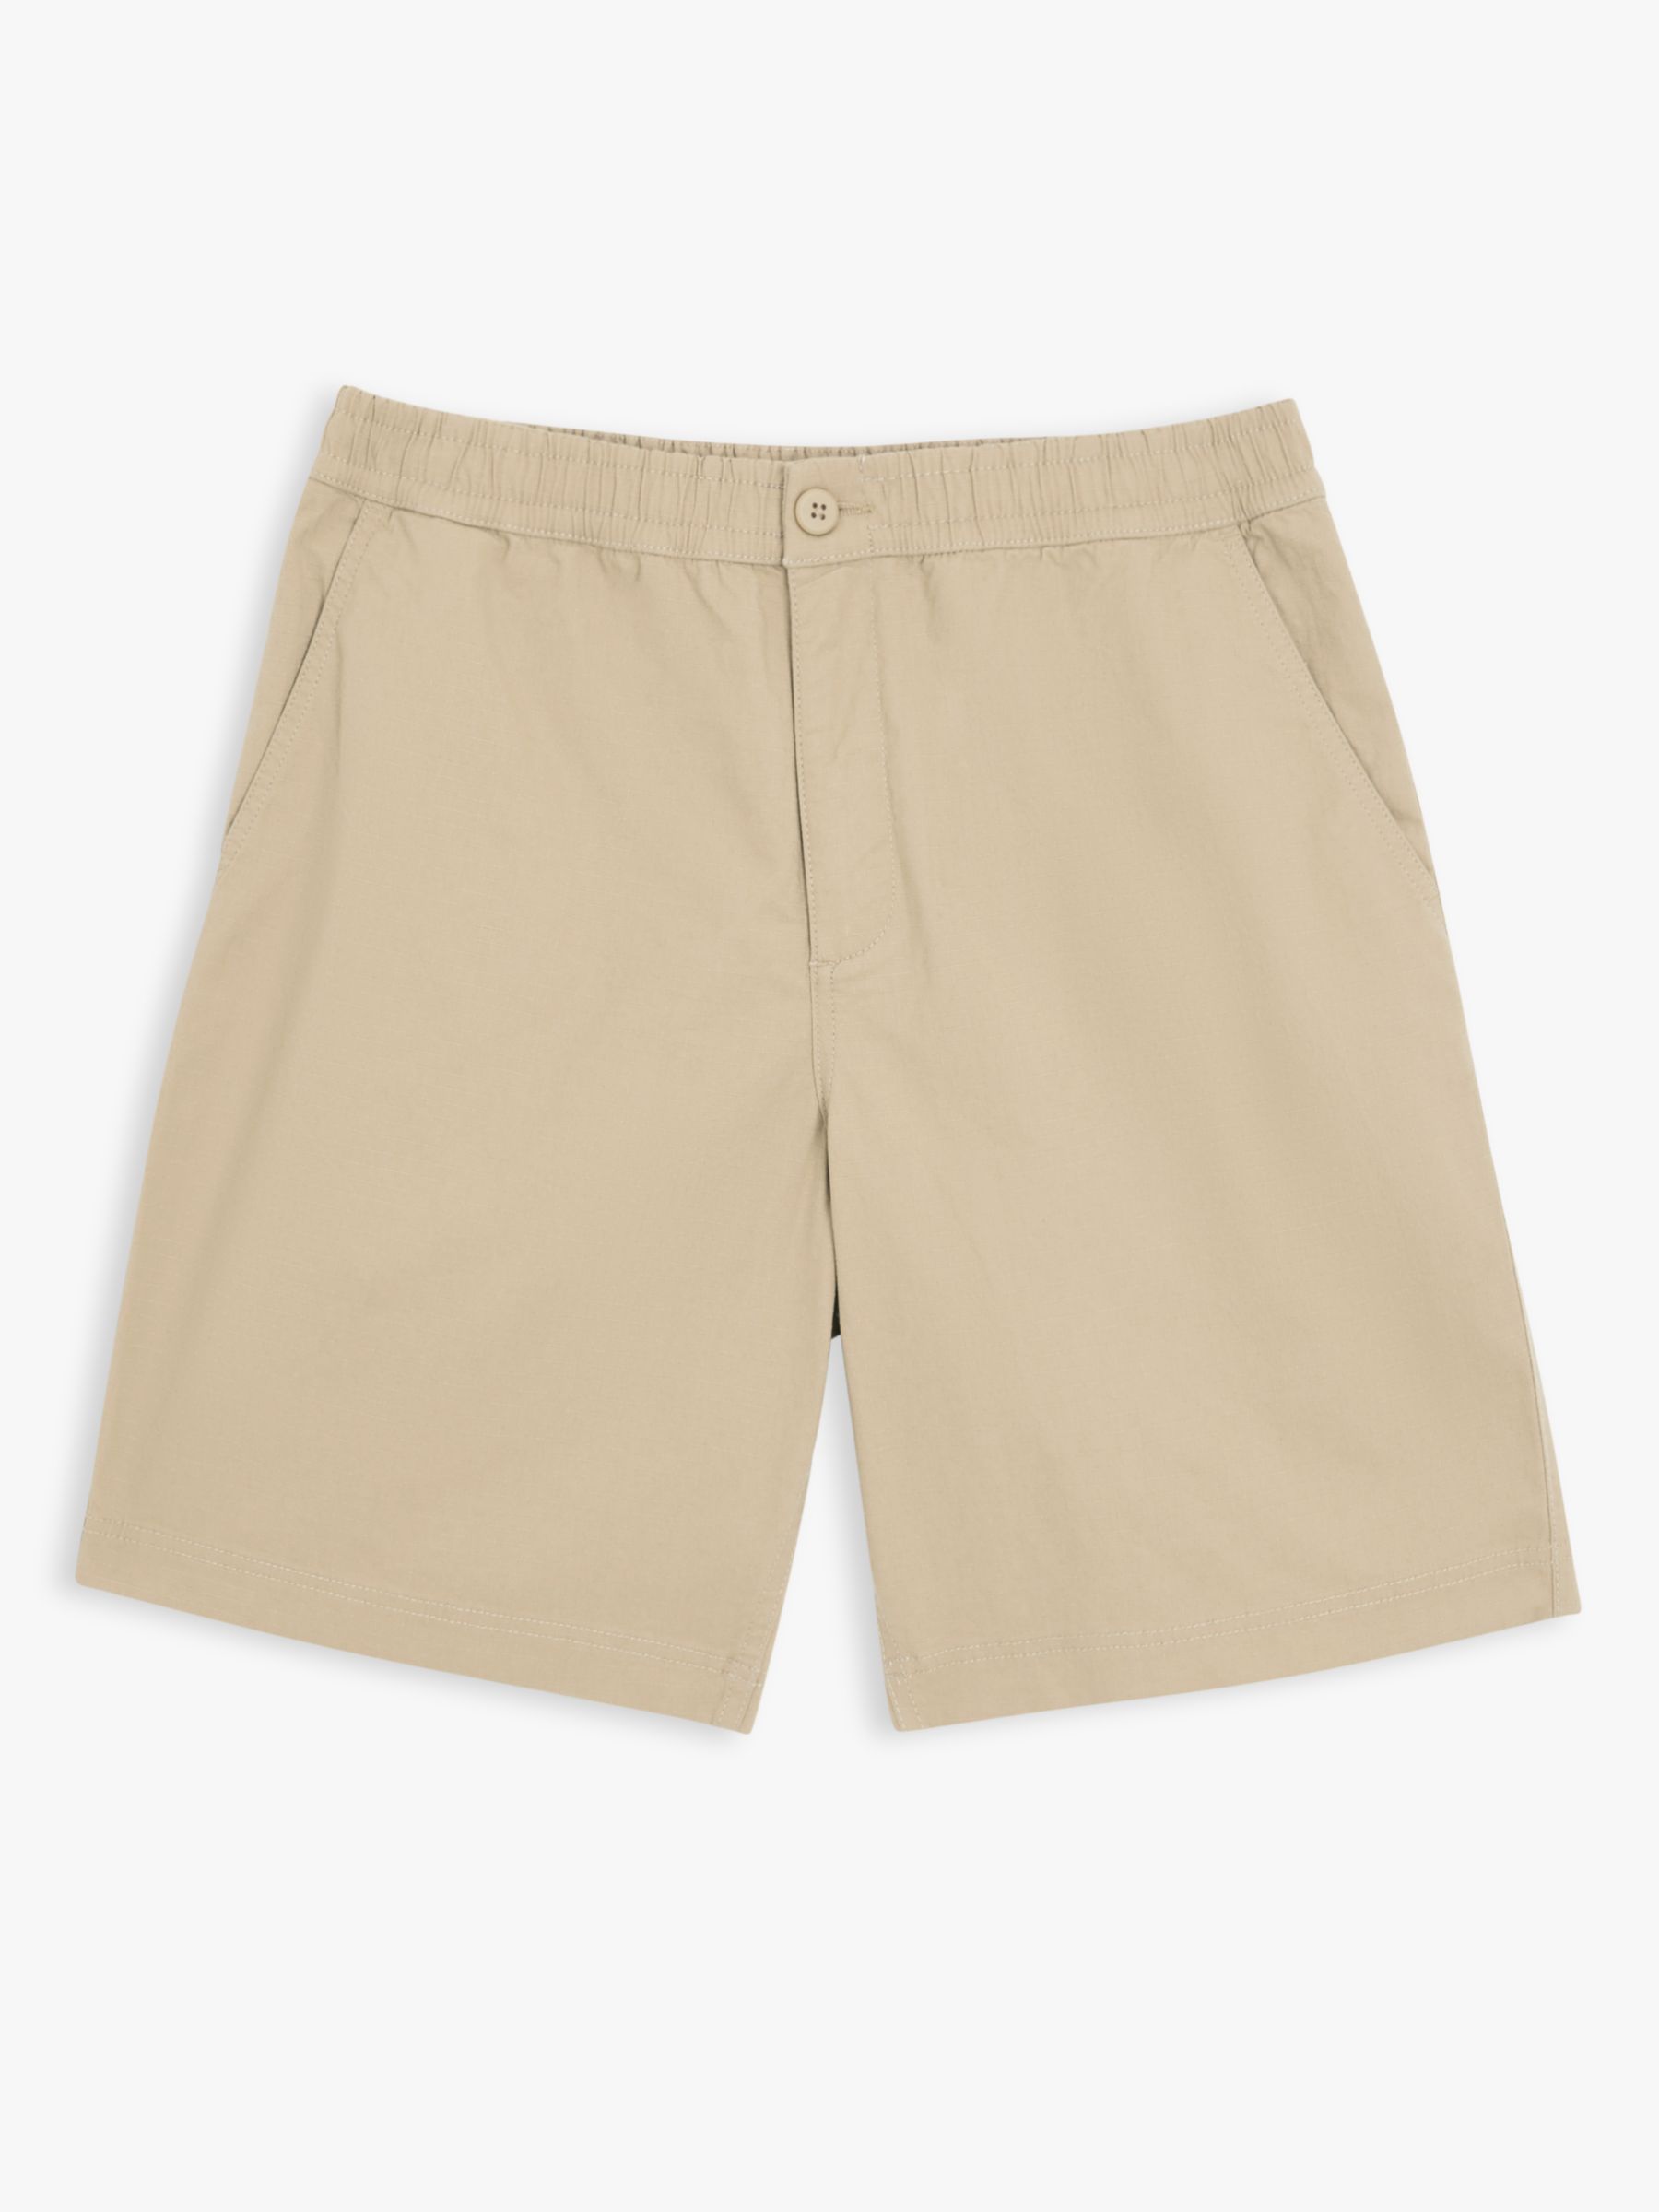 John Lewis ANYDAY Cotton Ripstop Shorts, Sand, S